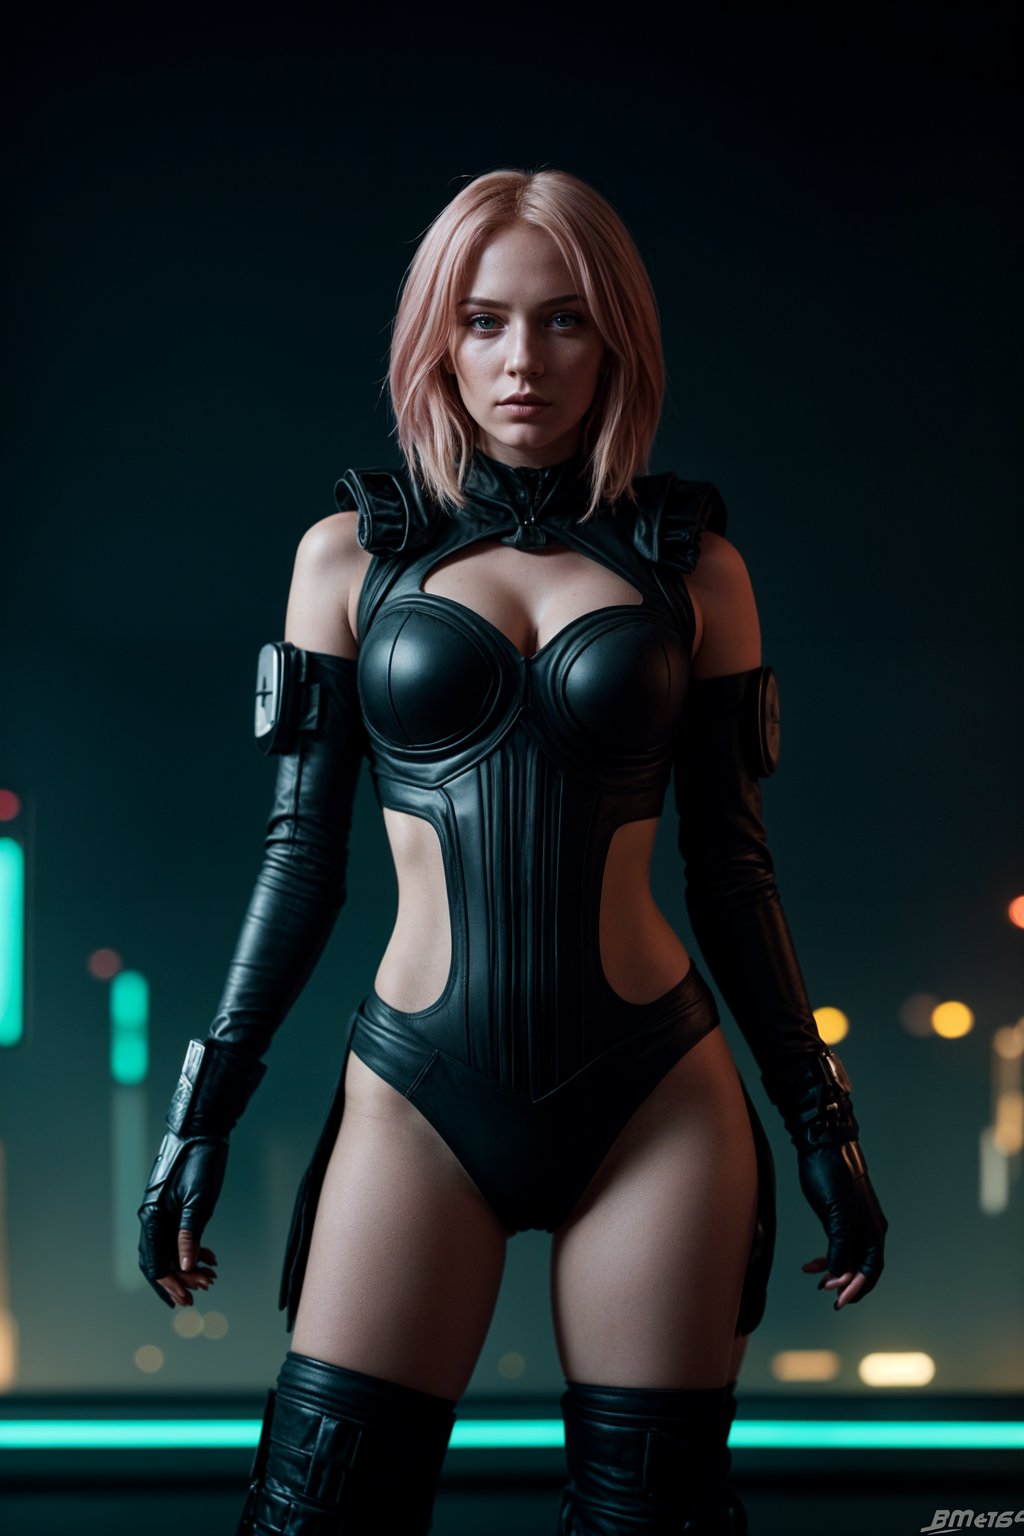 cosplayer woman in a cyberpunk outfit, posing against the backdrop of bright city lights